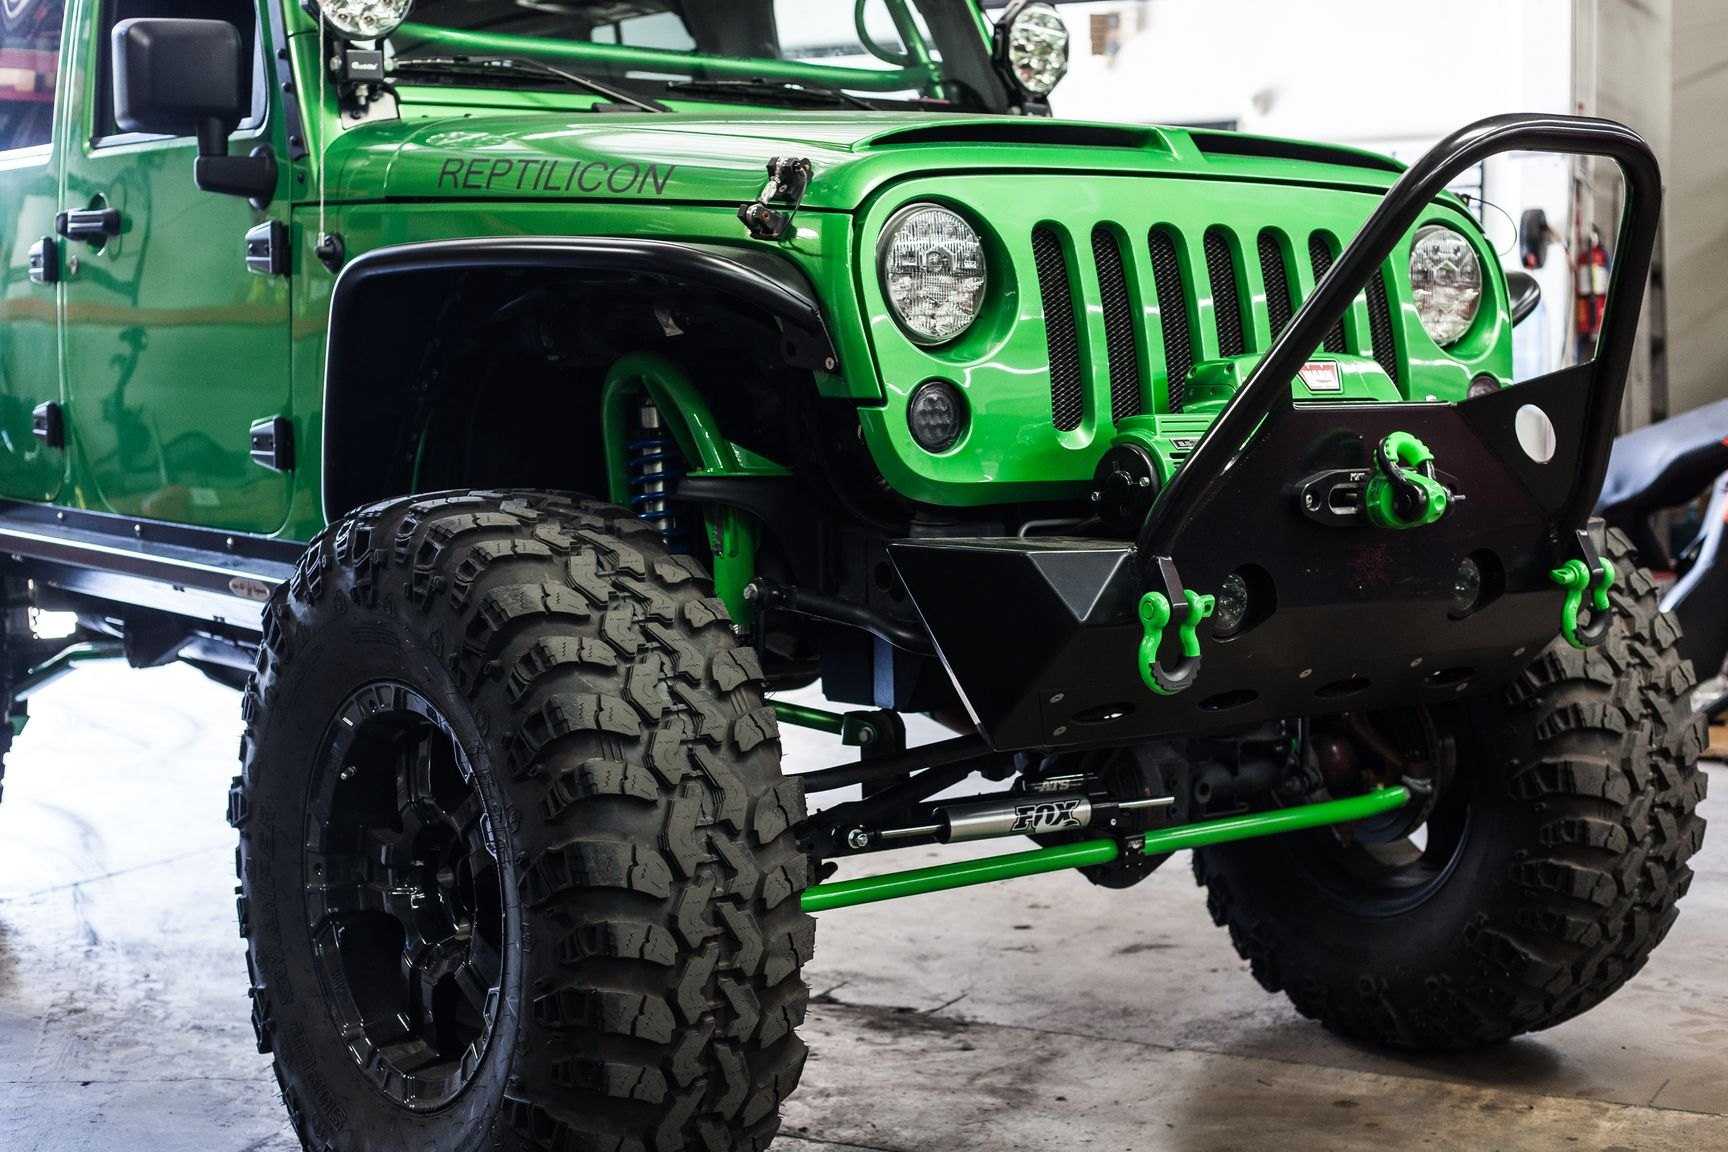 Aftermarket Off-Road Front Bumper on Green Lifted Jeep Wrangler - Photo by Rebel Off-Road